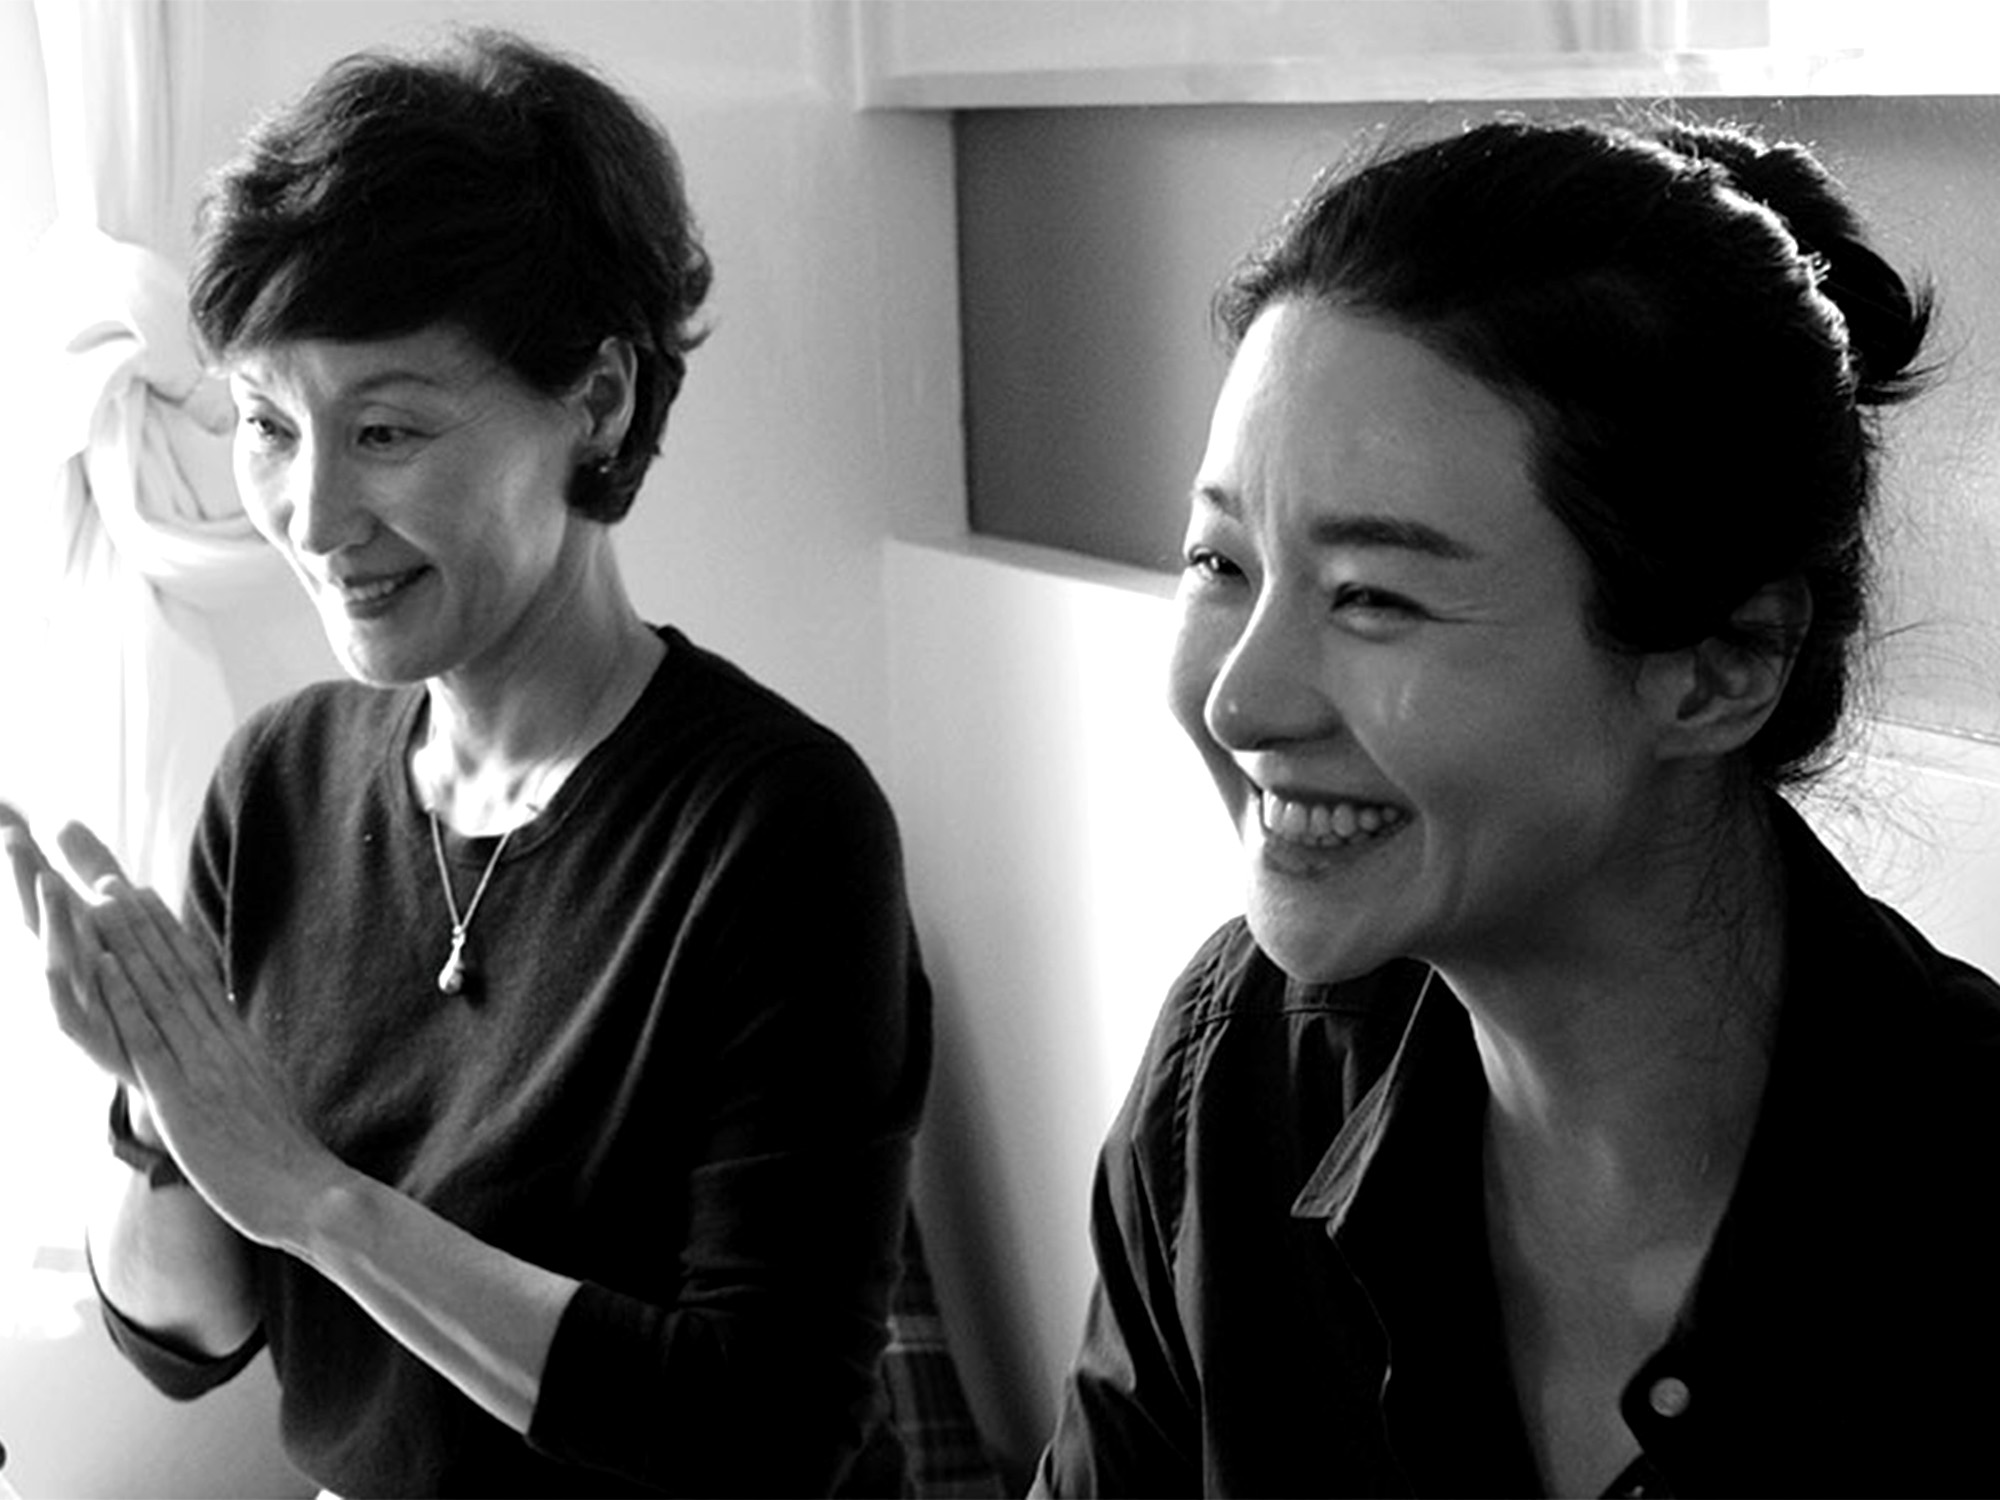 Hong Sang-soo gets lost in the funhouse in the first